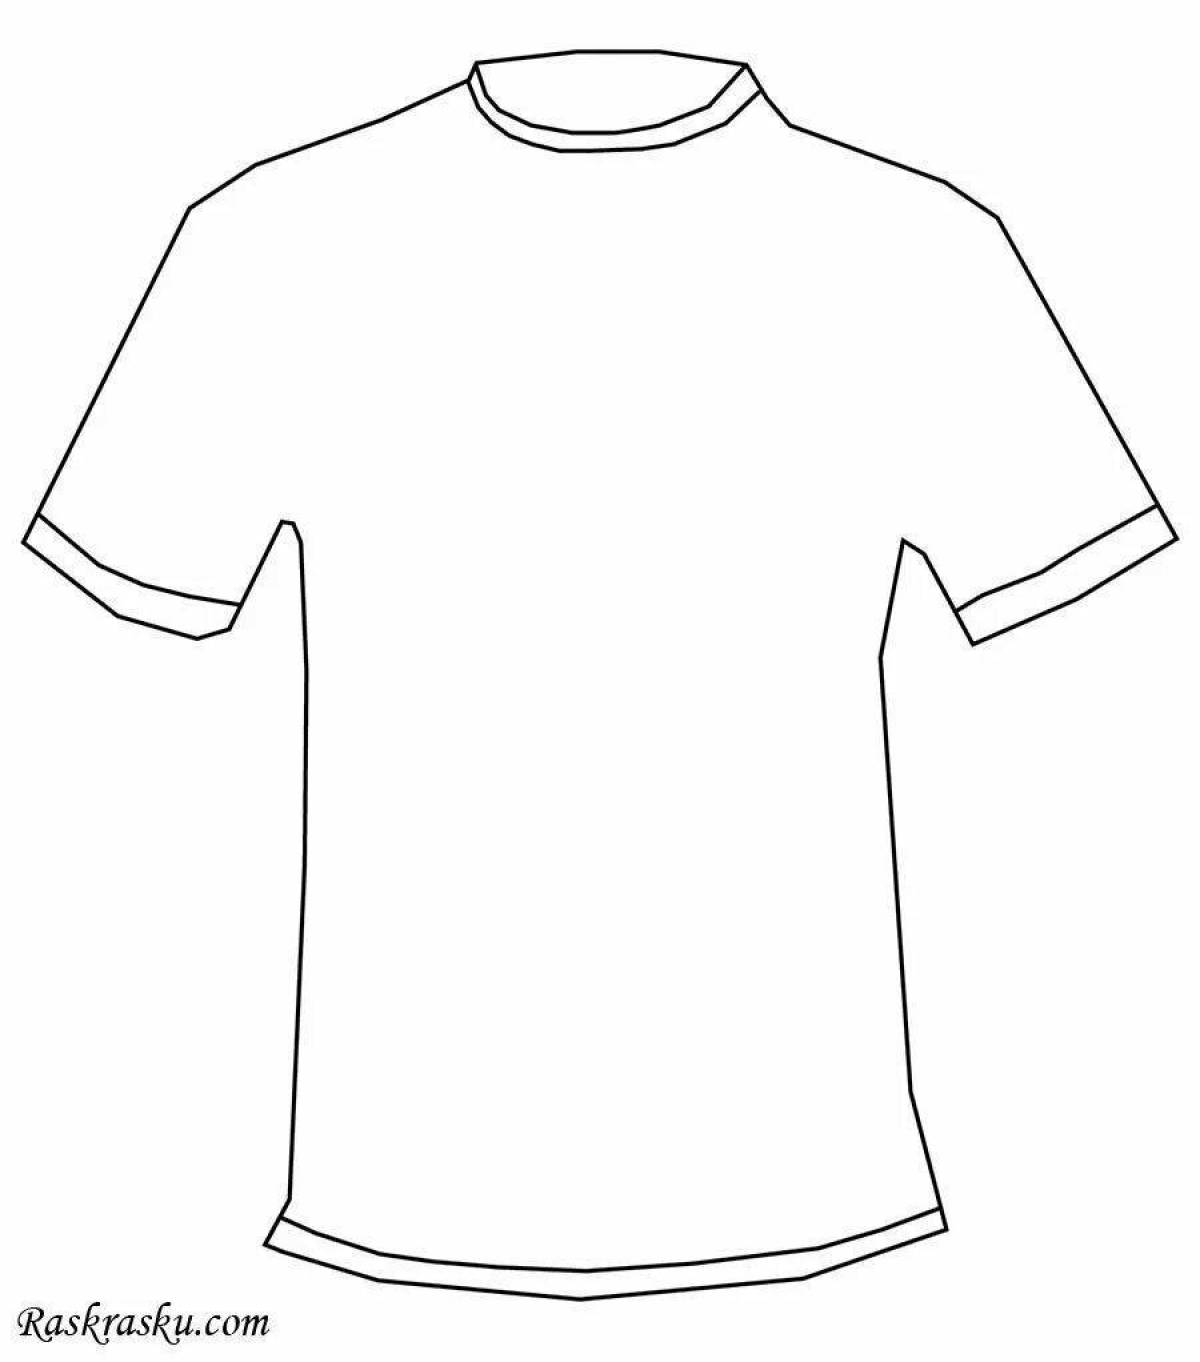 Coloring page adorable boy in a T-shirt